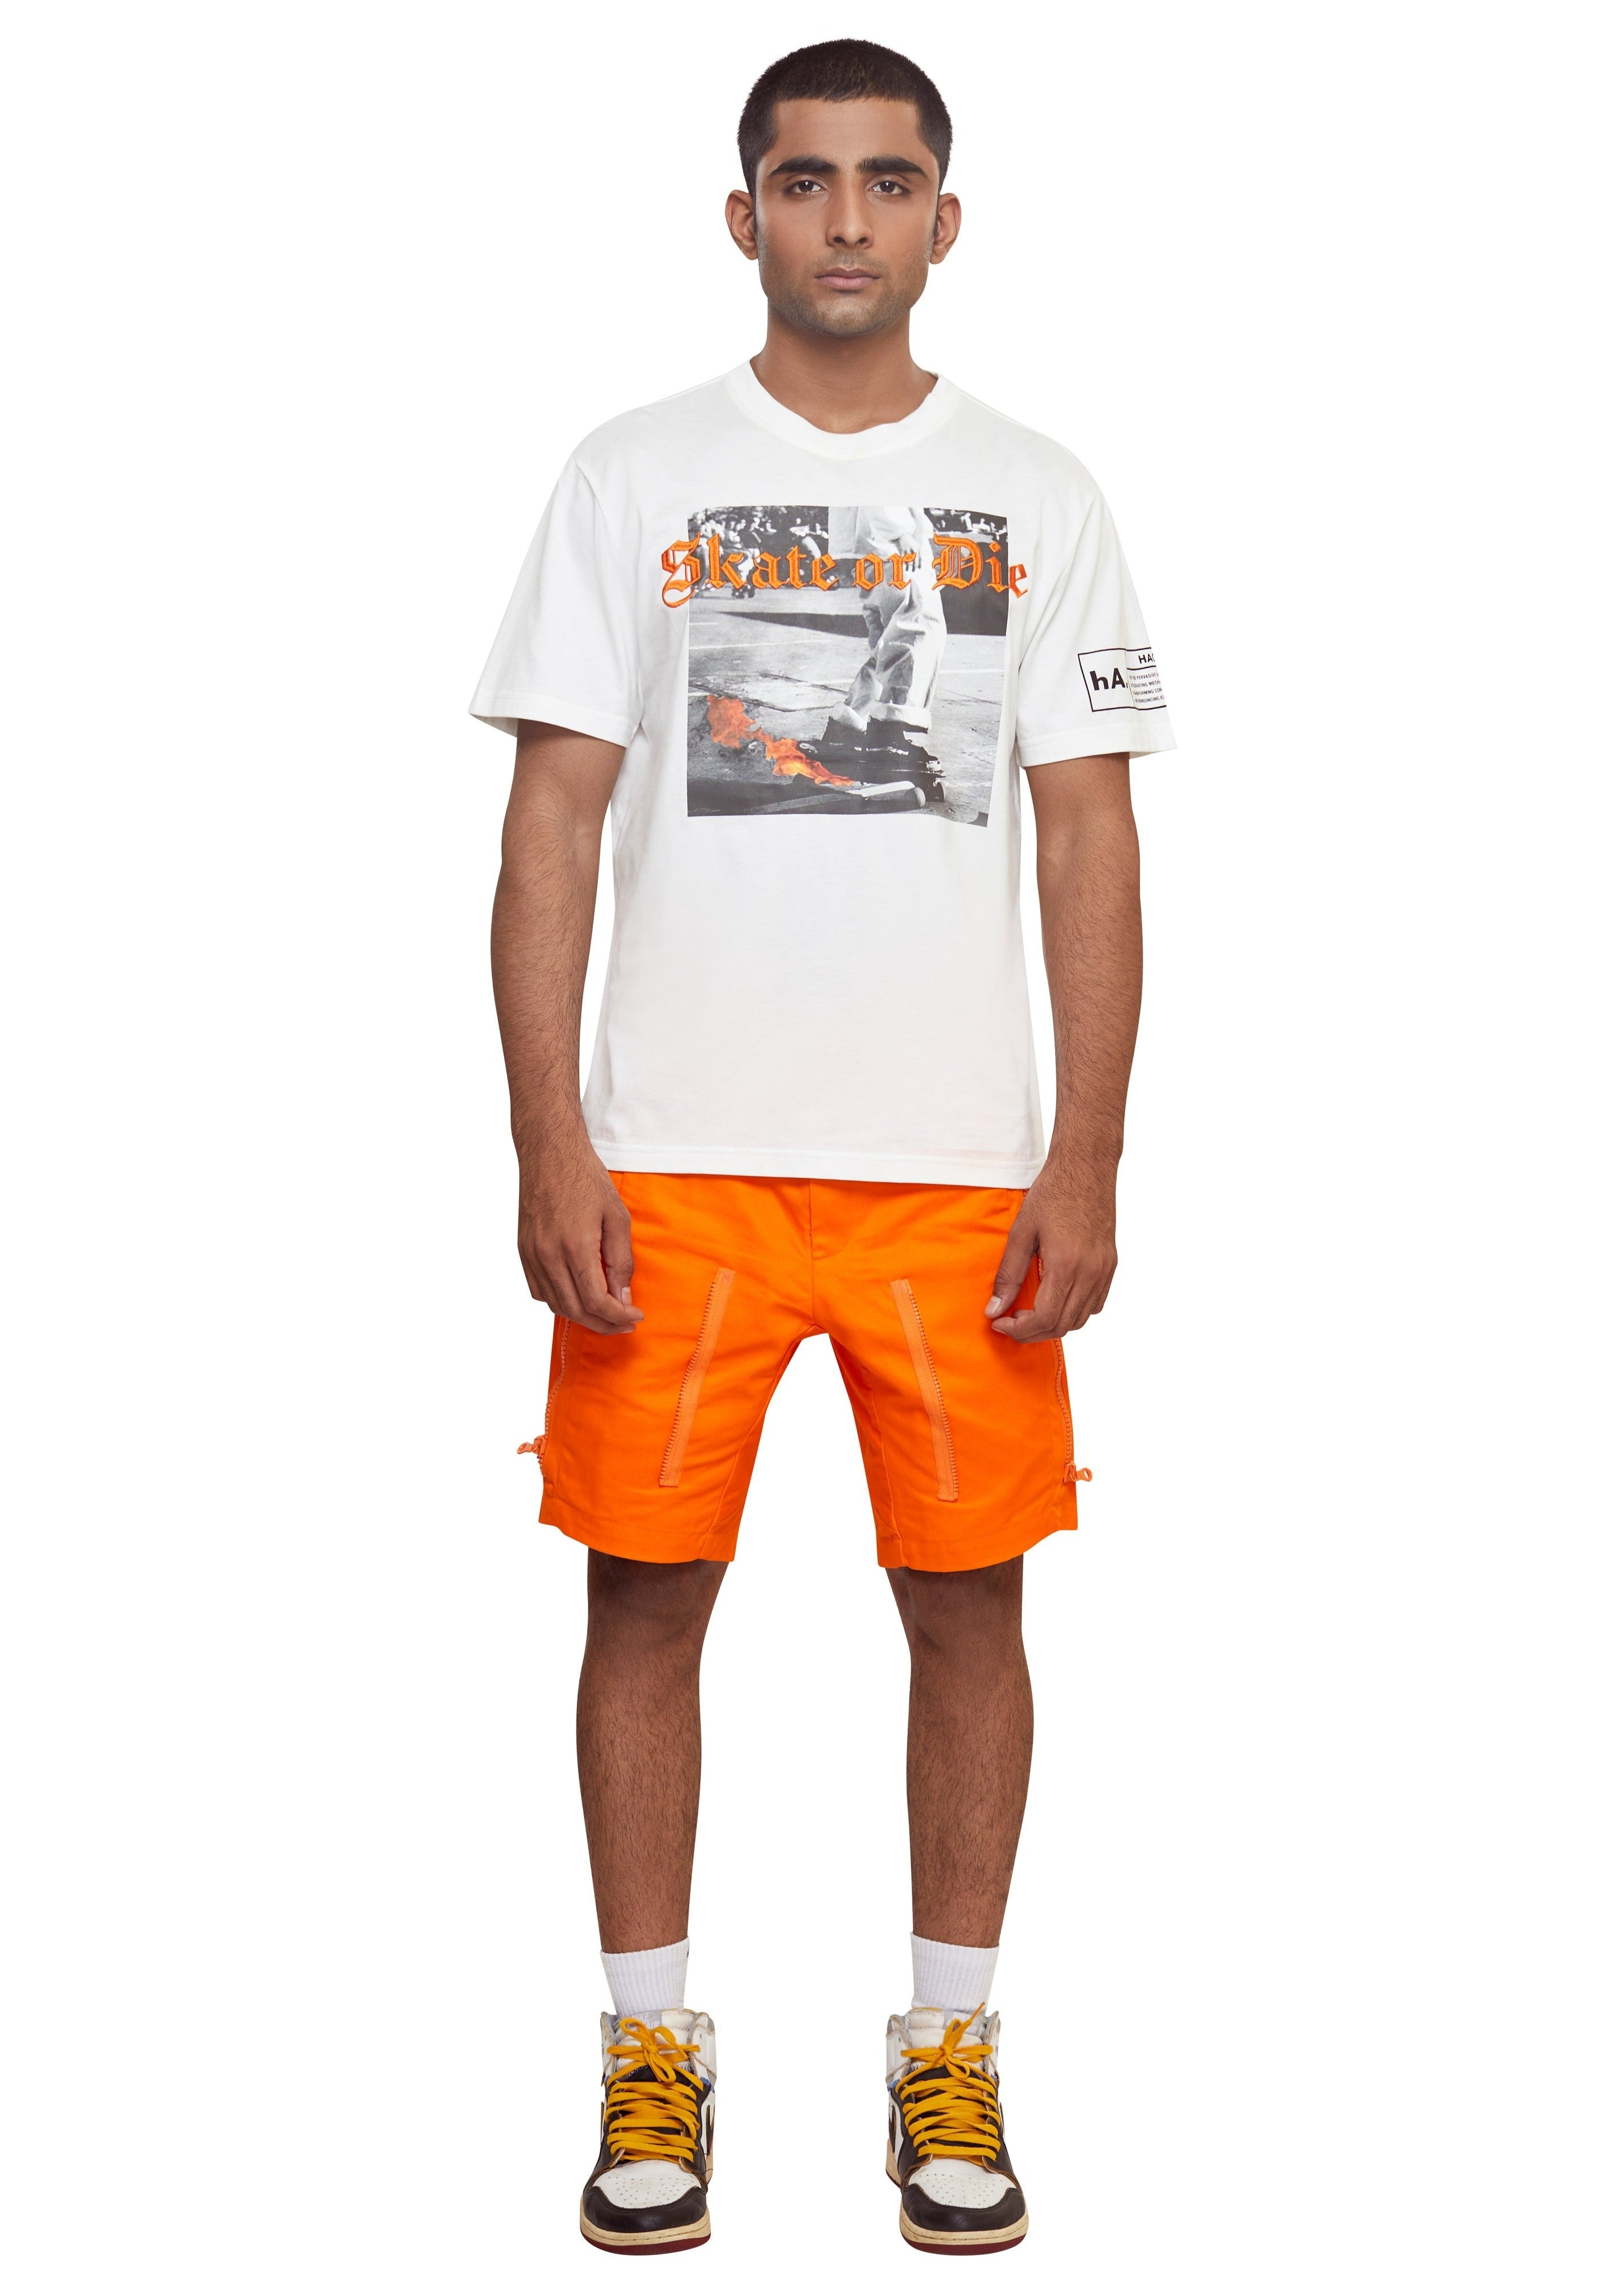 Off-white Cotton "Skate or Die" graphic printed and embroidered T-Shirt from the brand Haculla